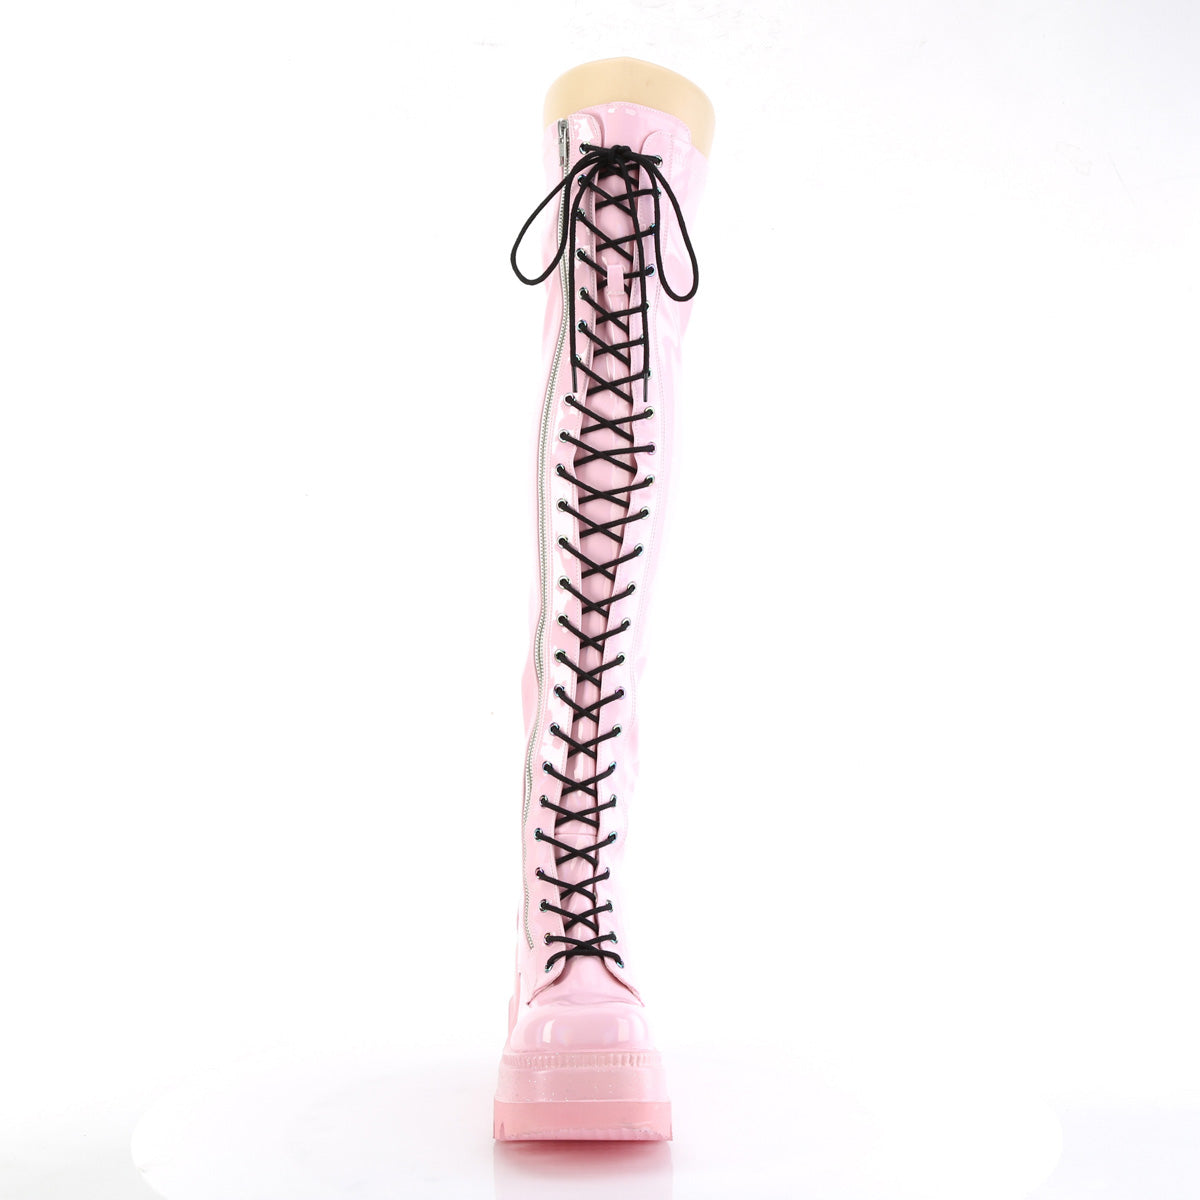 SHAKER-374 Baby Pink Stretch Thigh Boots